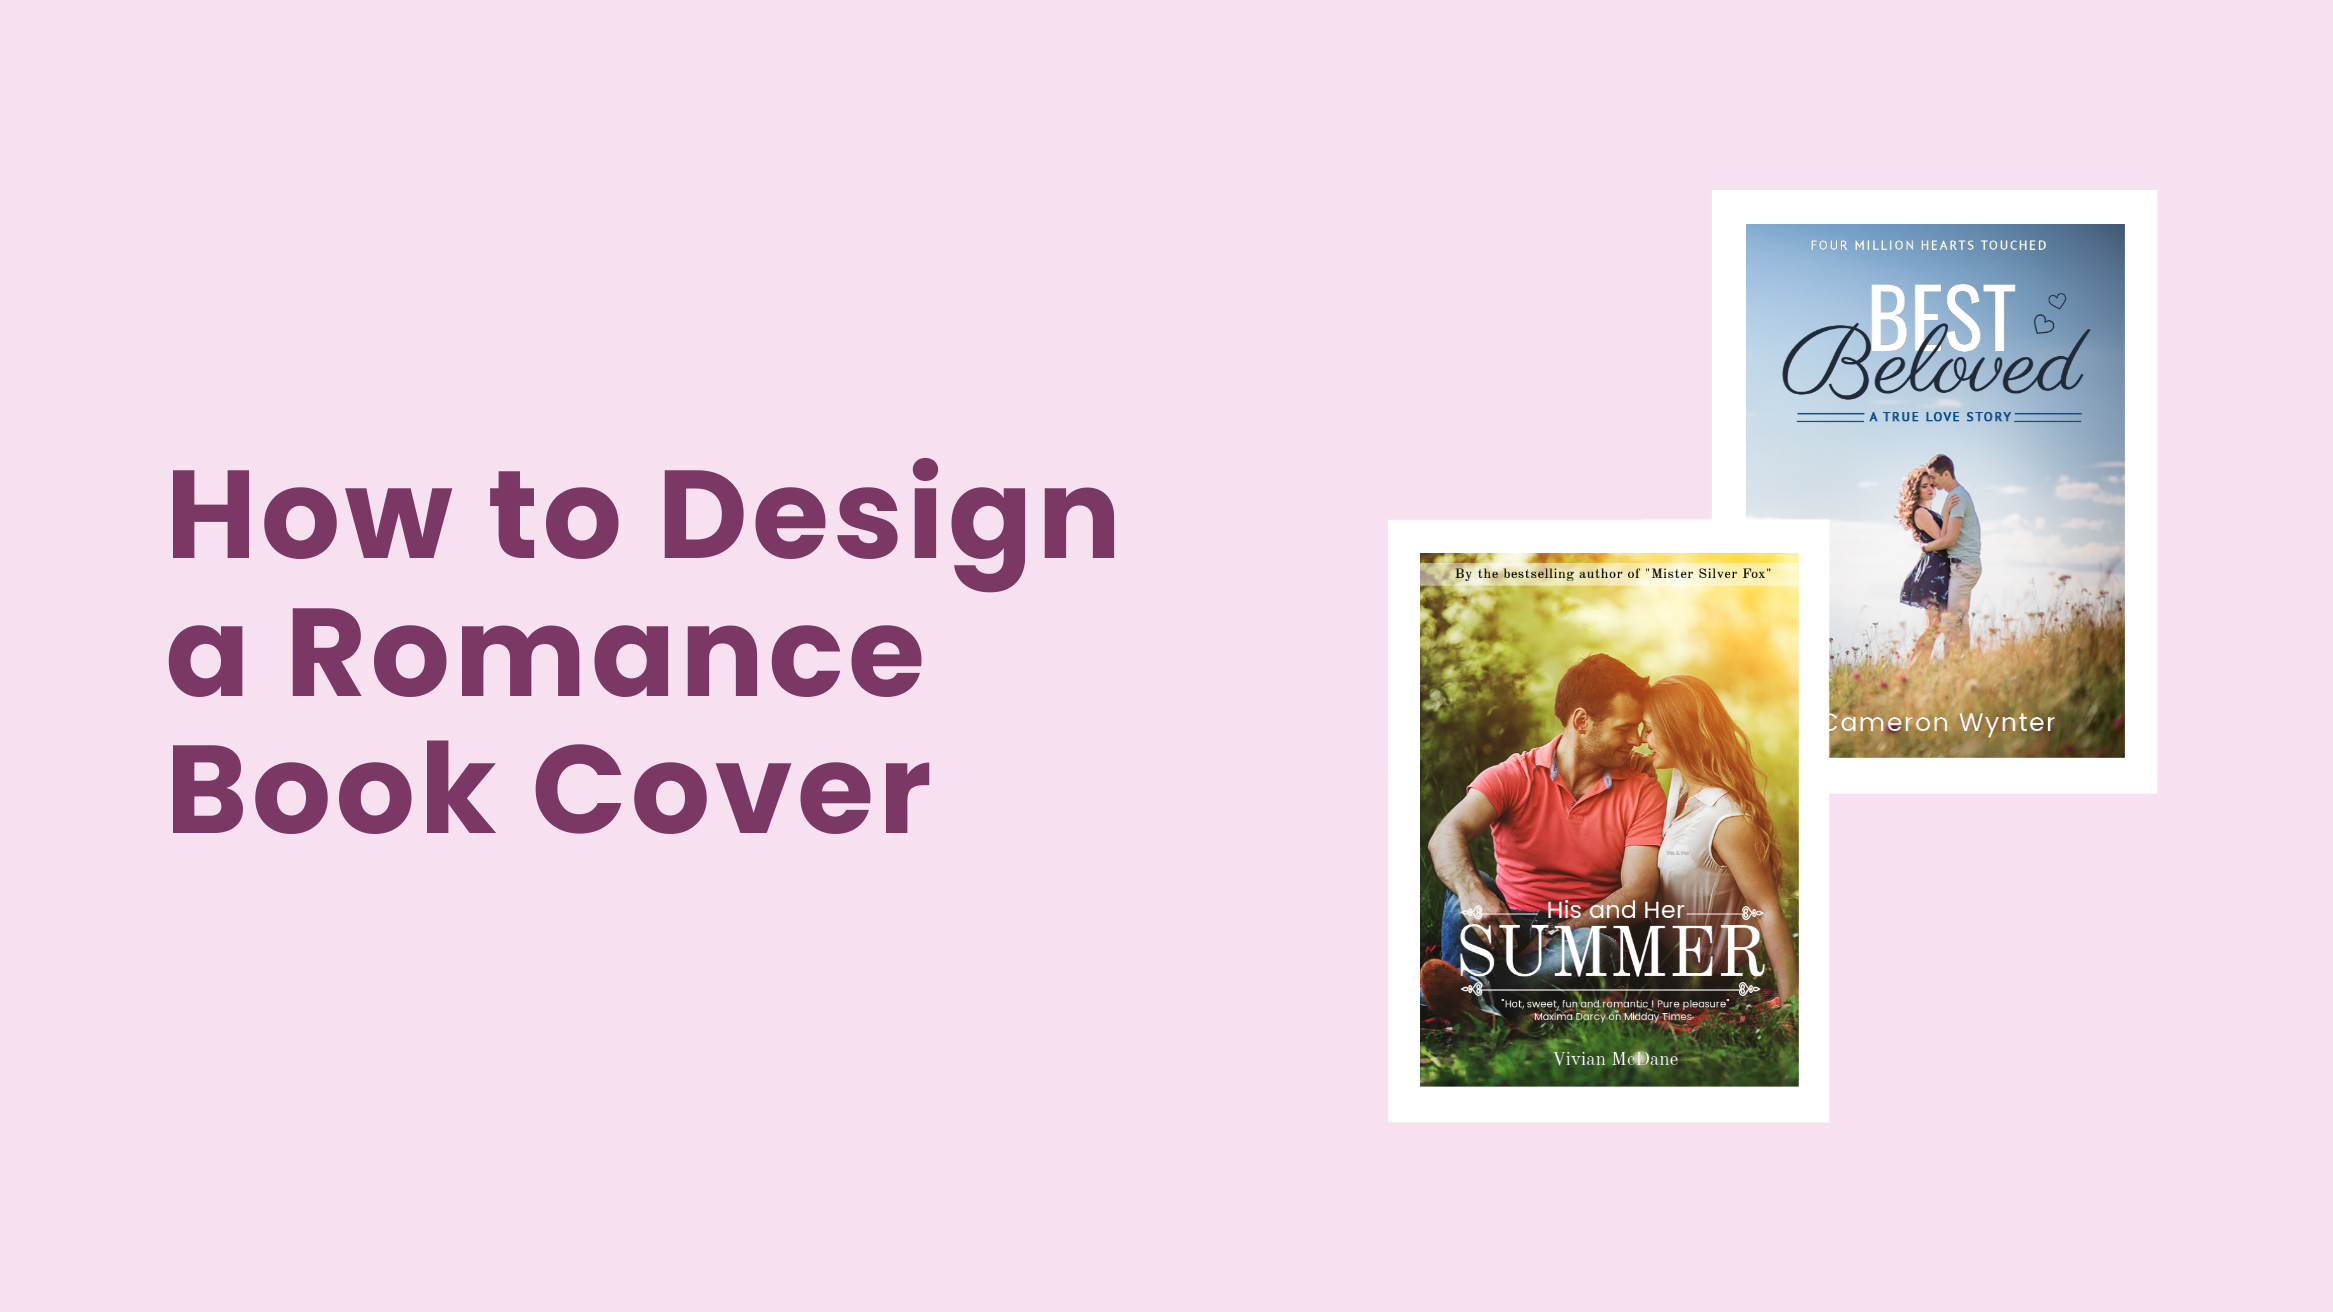 How to Design a Romance Book Cover